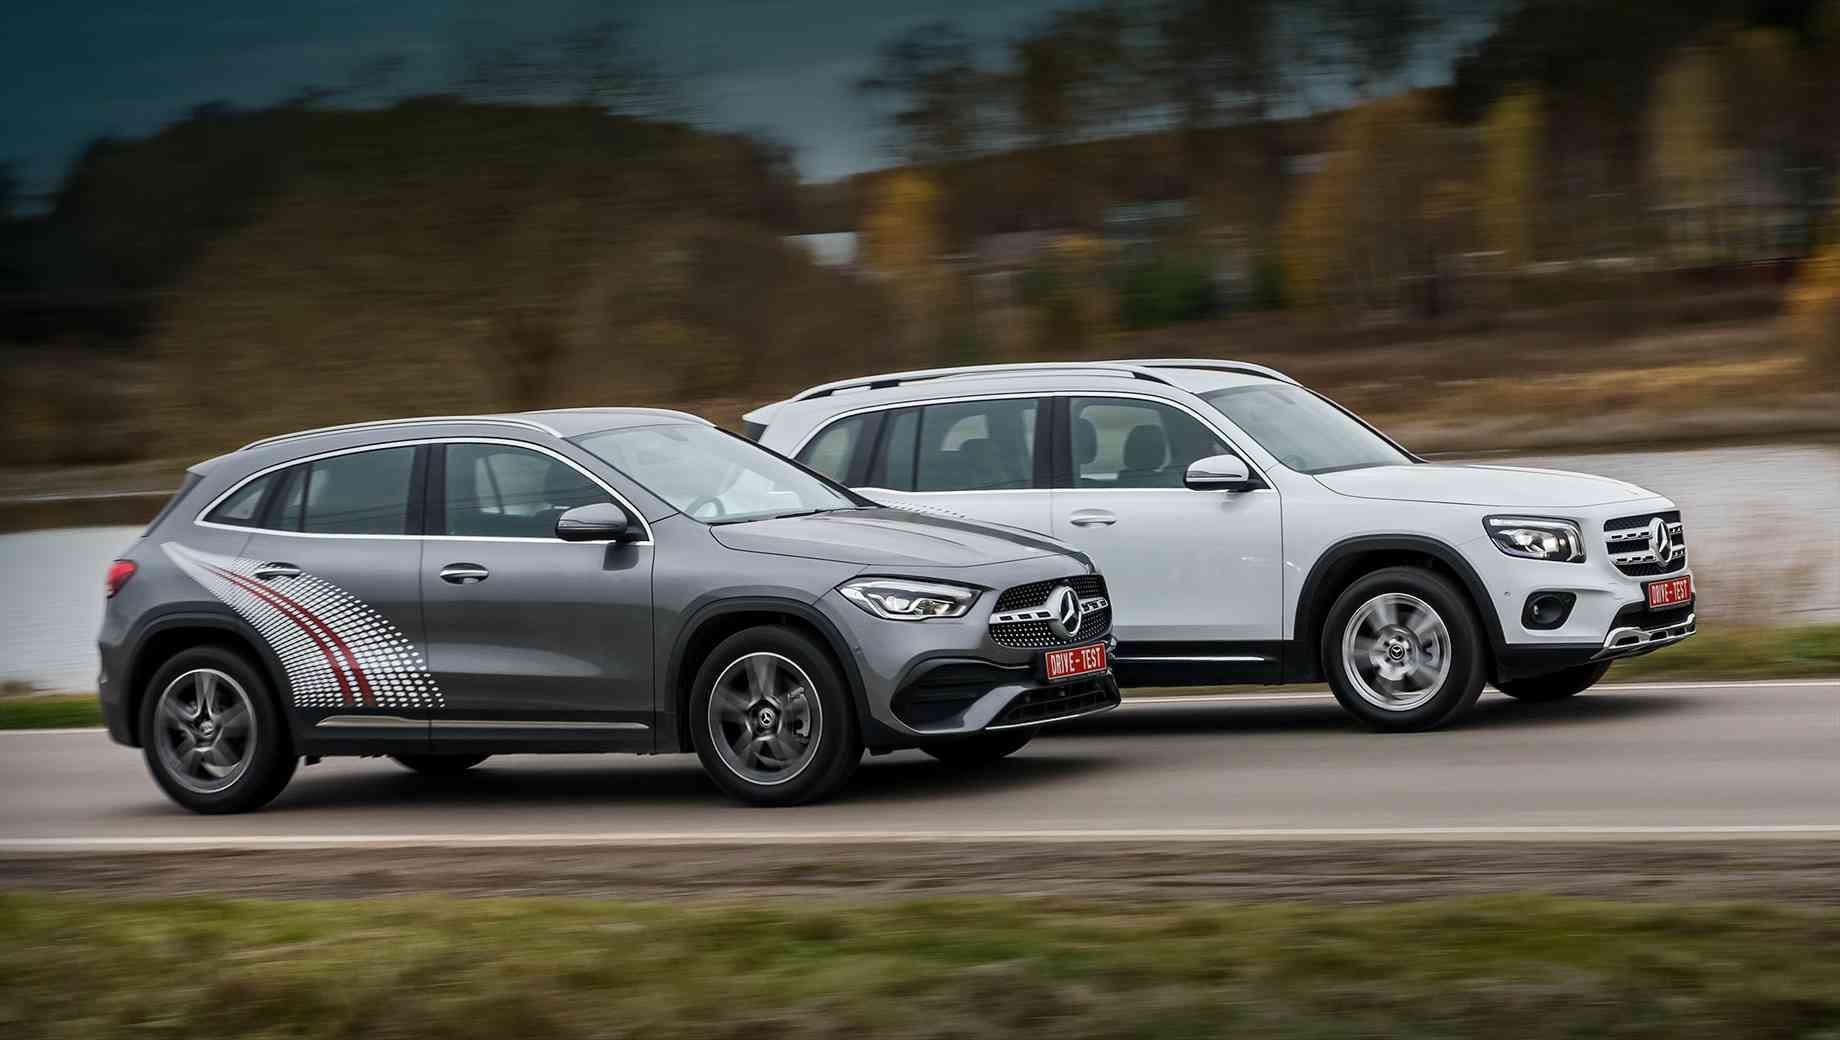 We check the Mercedes-Benz GLA and GLK 250 4matic crossovers – test drive